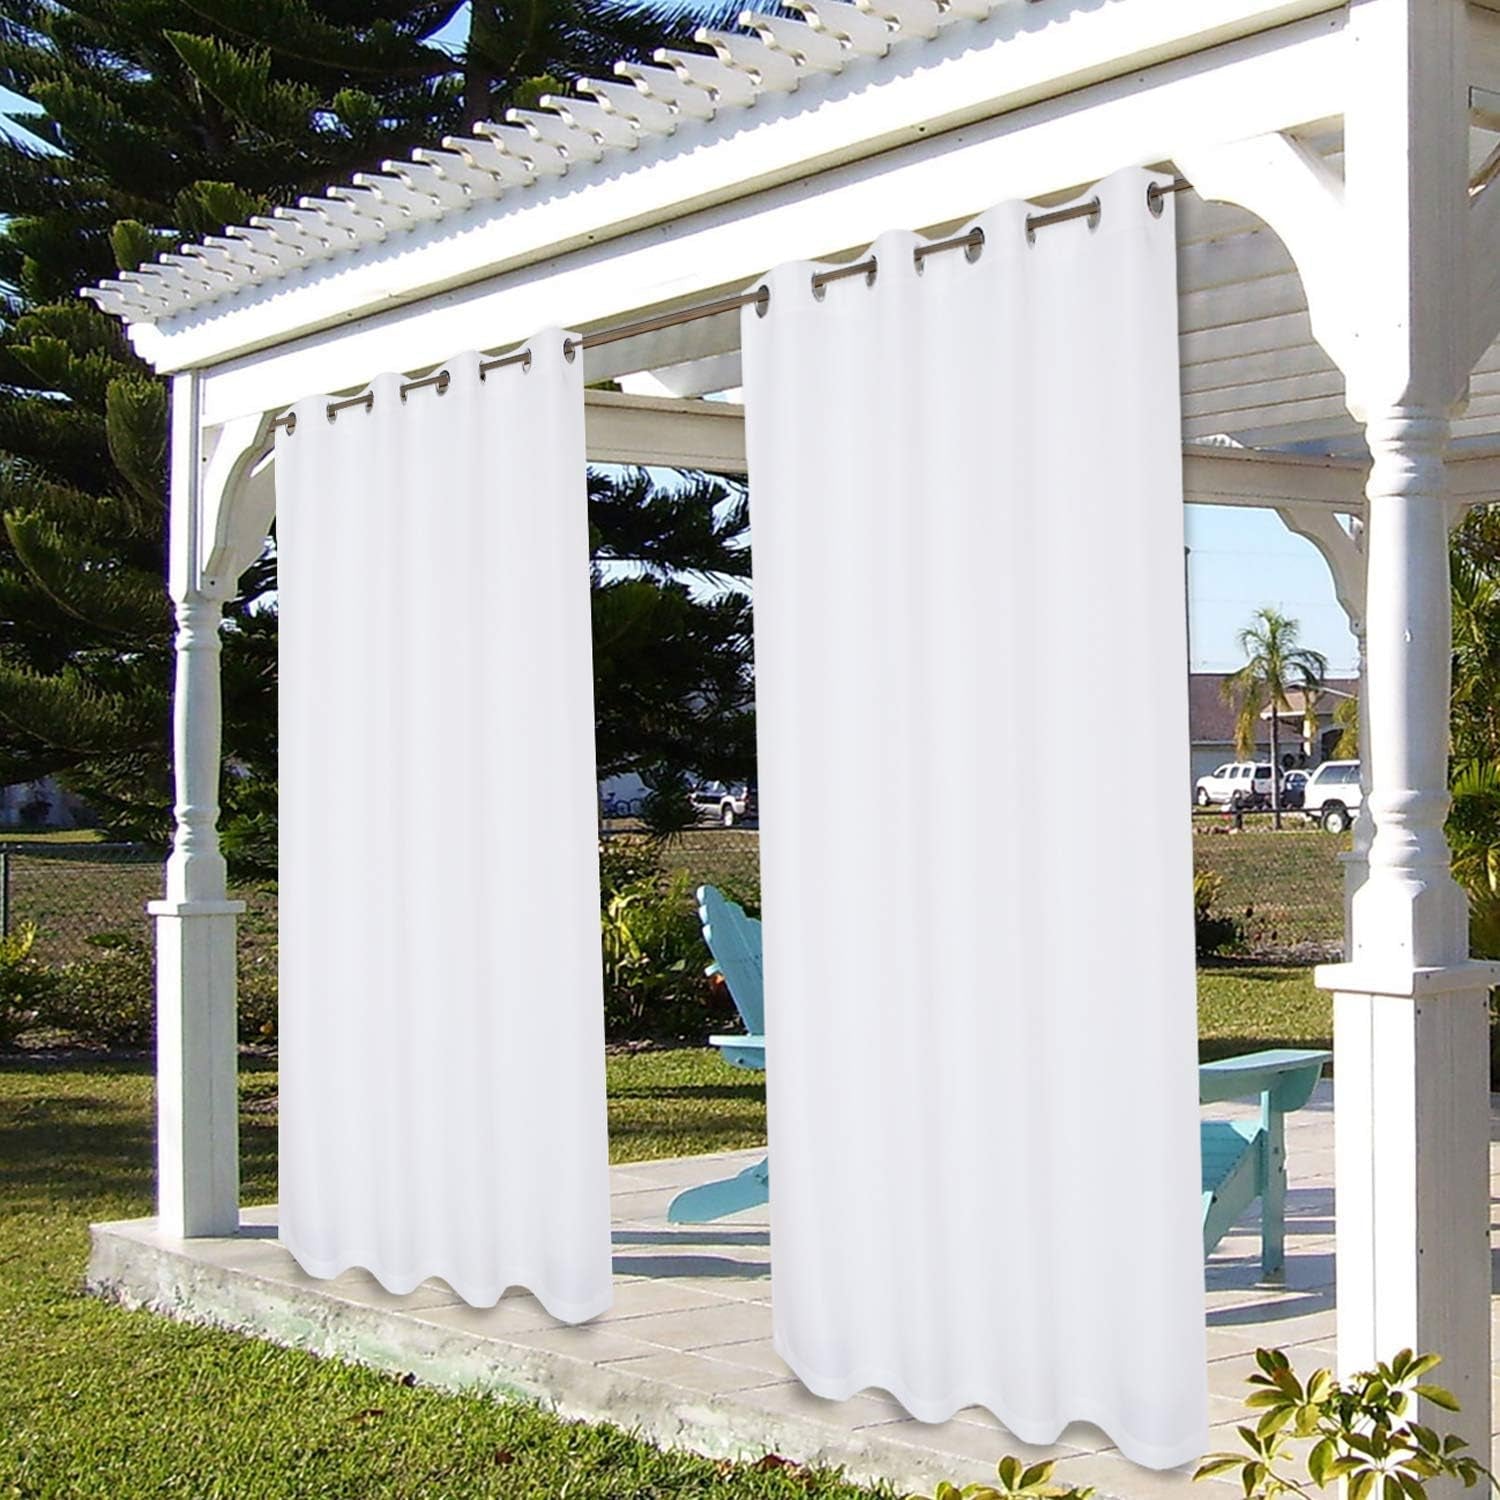 BONZER Outdoor Curtains for Patio Waterproof, Premium Thick Privacy Weatherproof Grommet outside Curtains for Porch, Gazebo, Deck, 1 Panel, 54W X 84L Inch, White  BONZER   